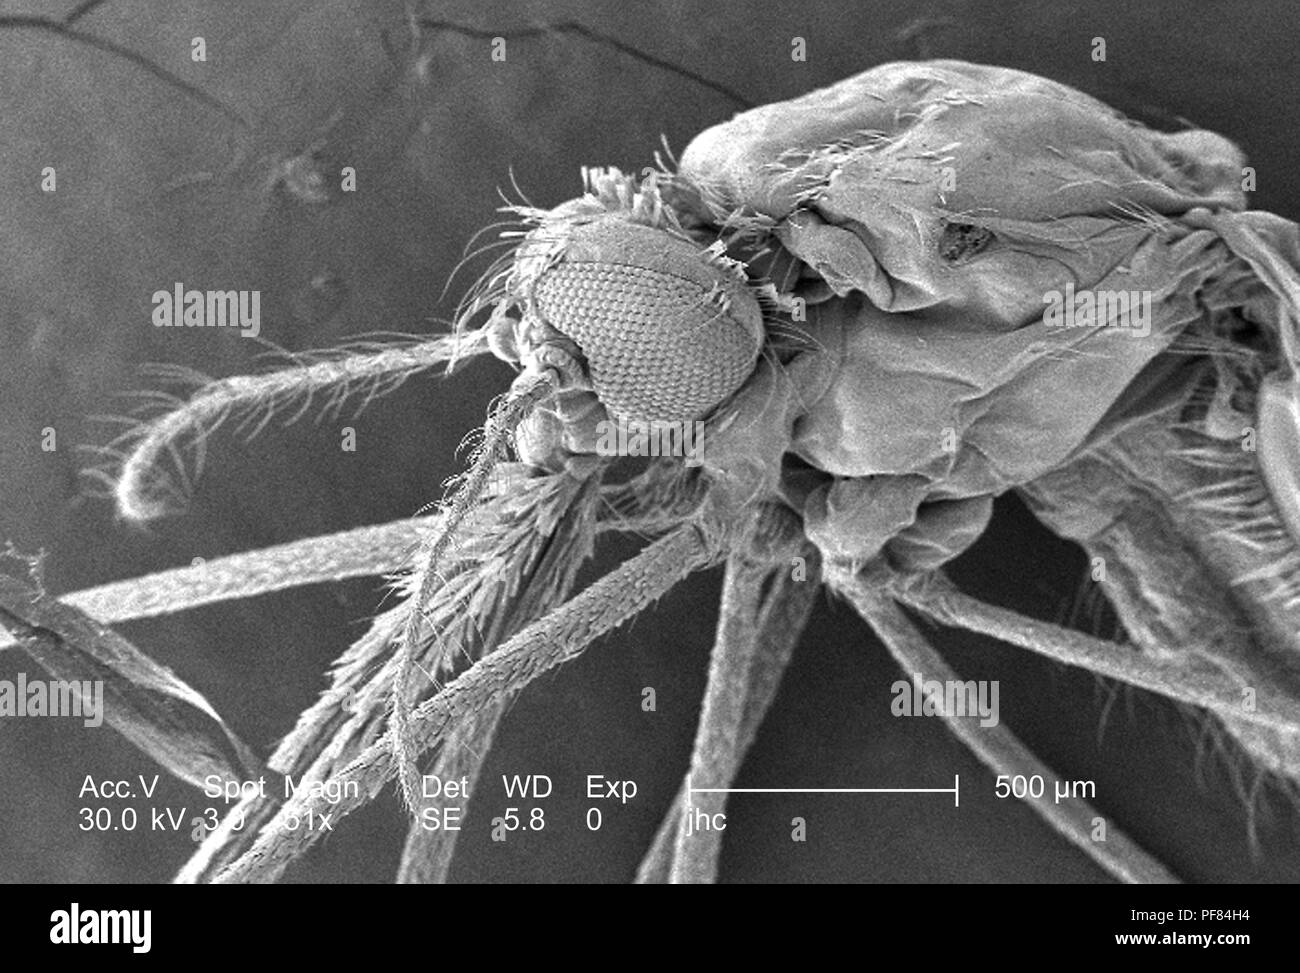 Ultrastructural morphologic features of the head and thoracic regions of an Anopheles gambiae mosquito, revealed in the 51x magnified scanning electron microscopic (SEM) image, 2006. Image courtesy Centers for Disease Control (CDC) / Dr Paul Howell. () Stock Photo